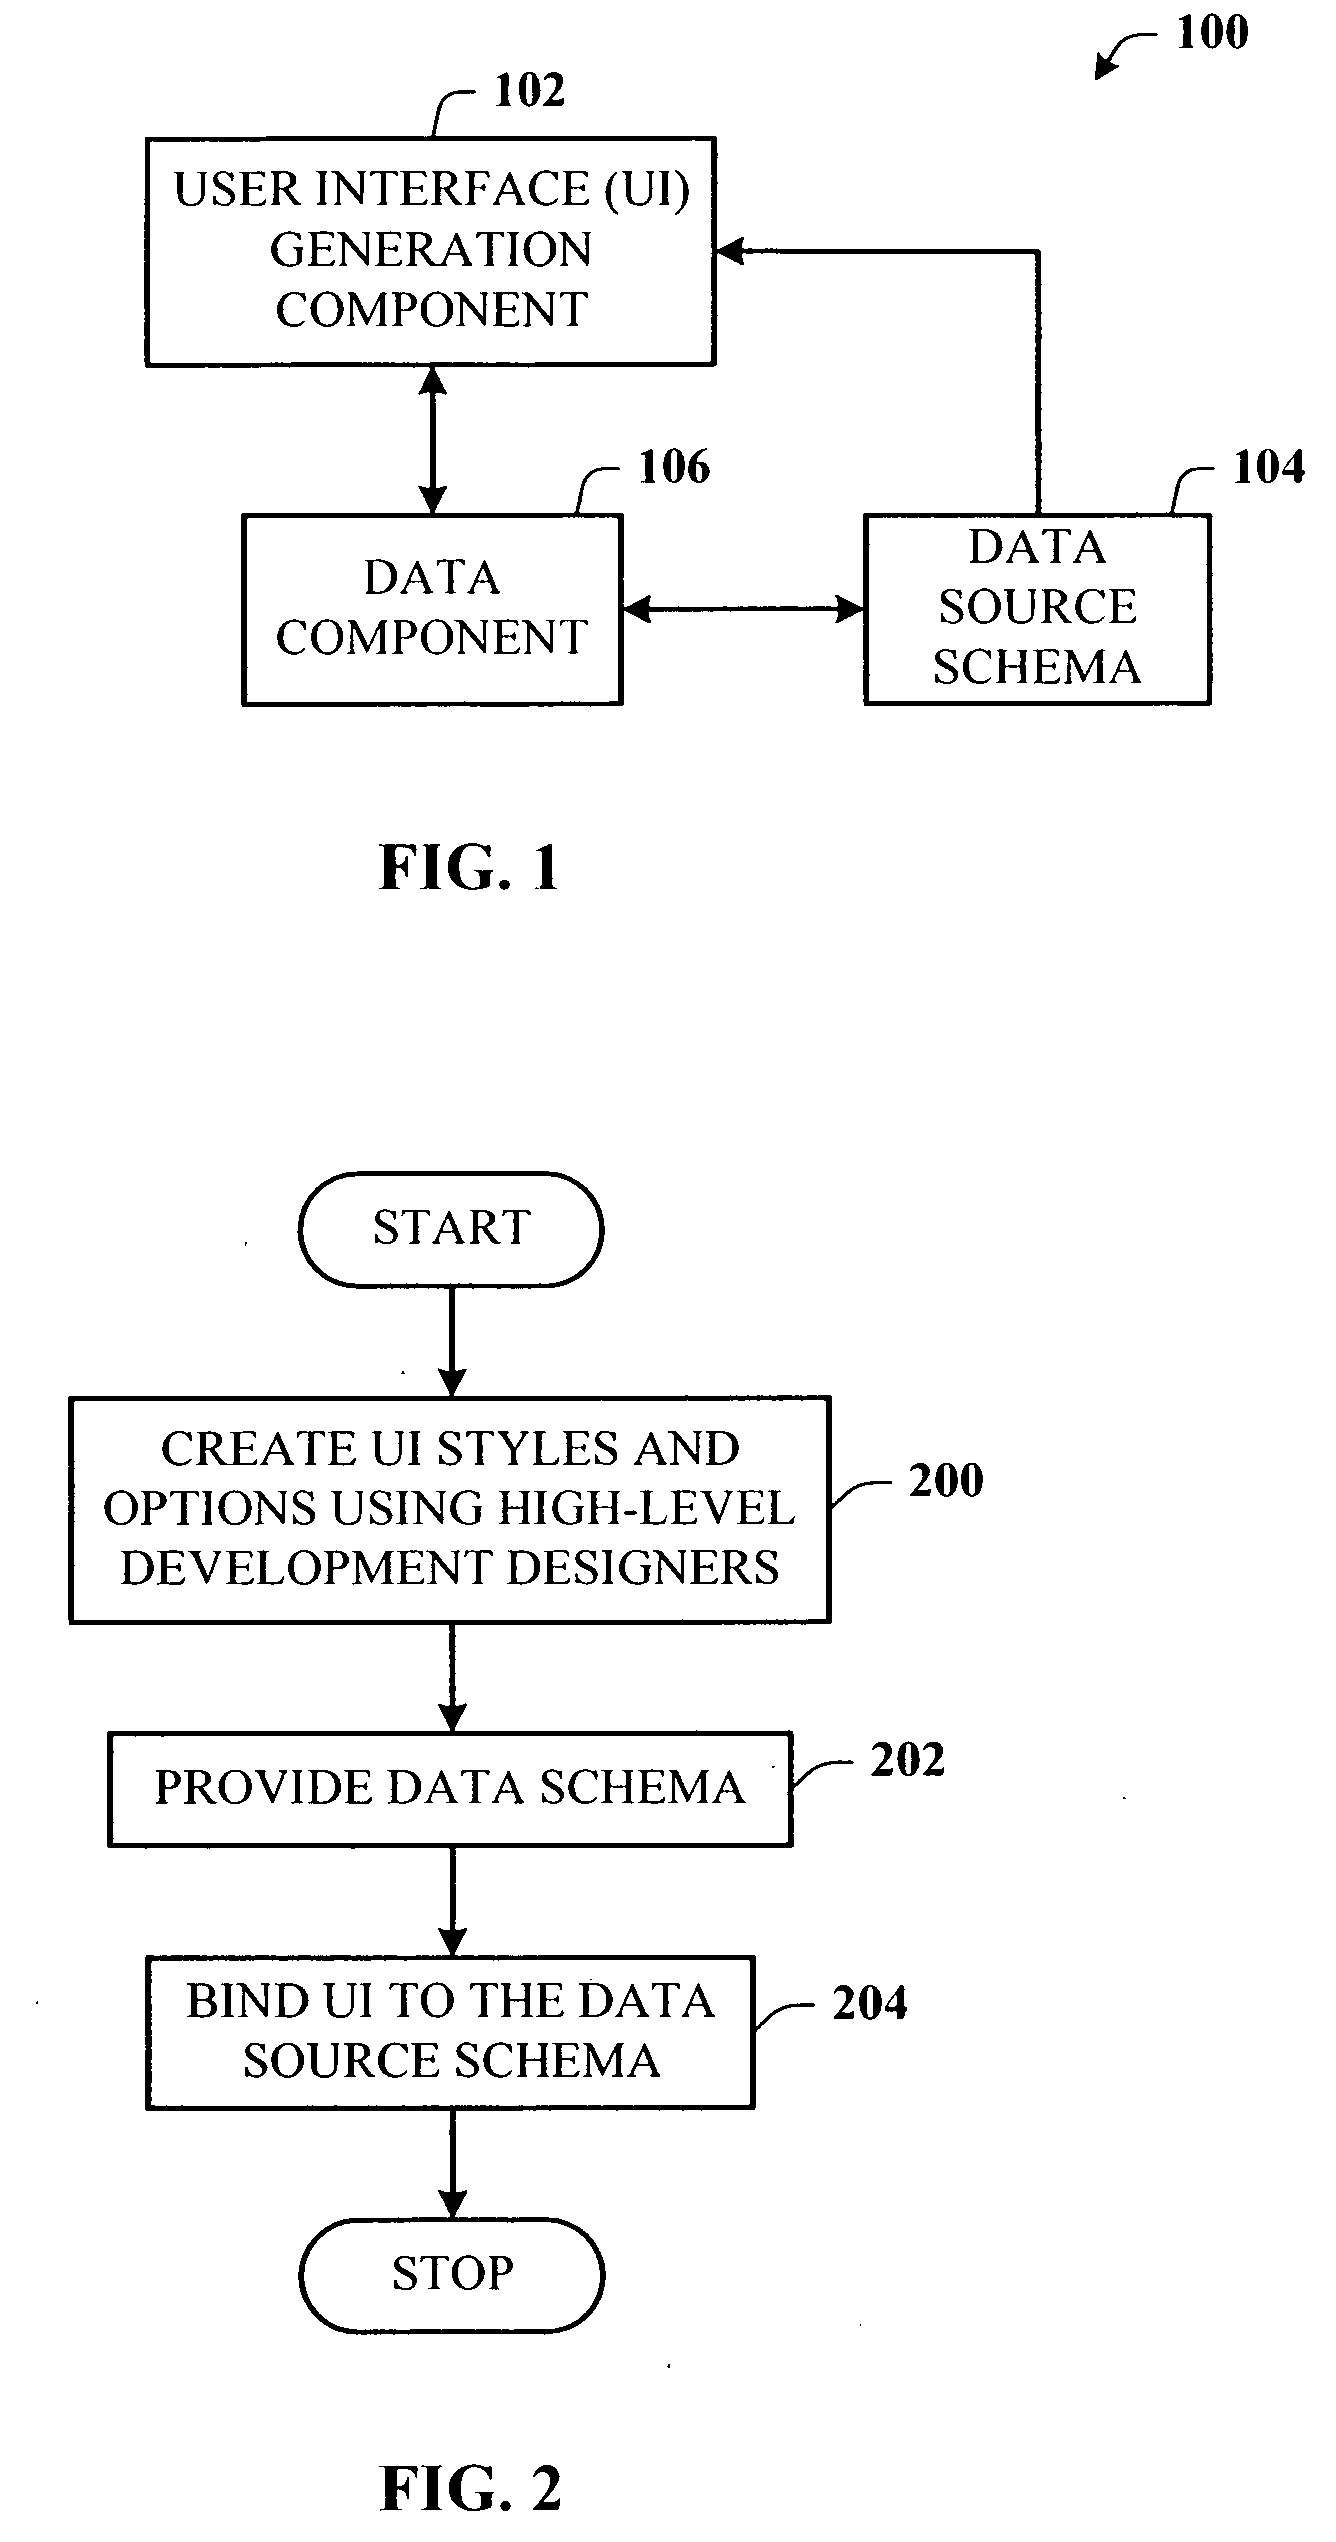 Architecture for creating a user interface using a data schema